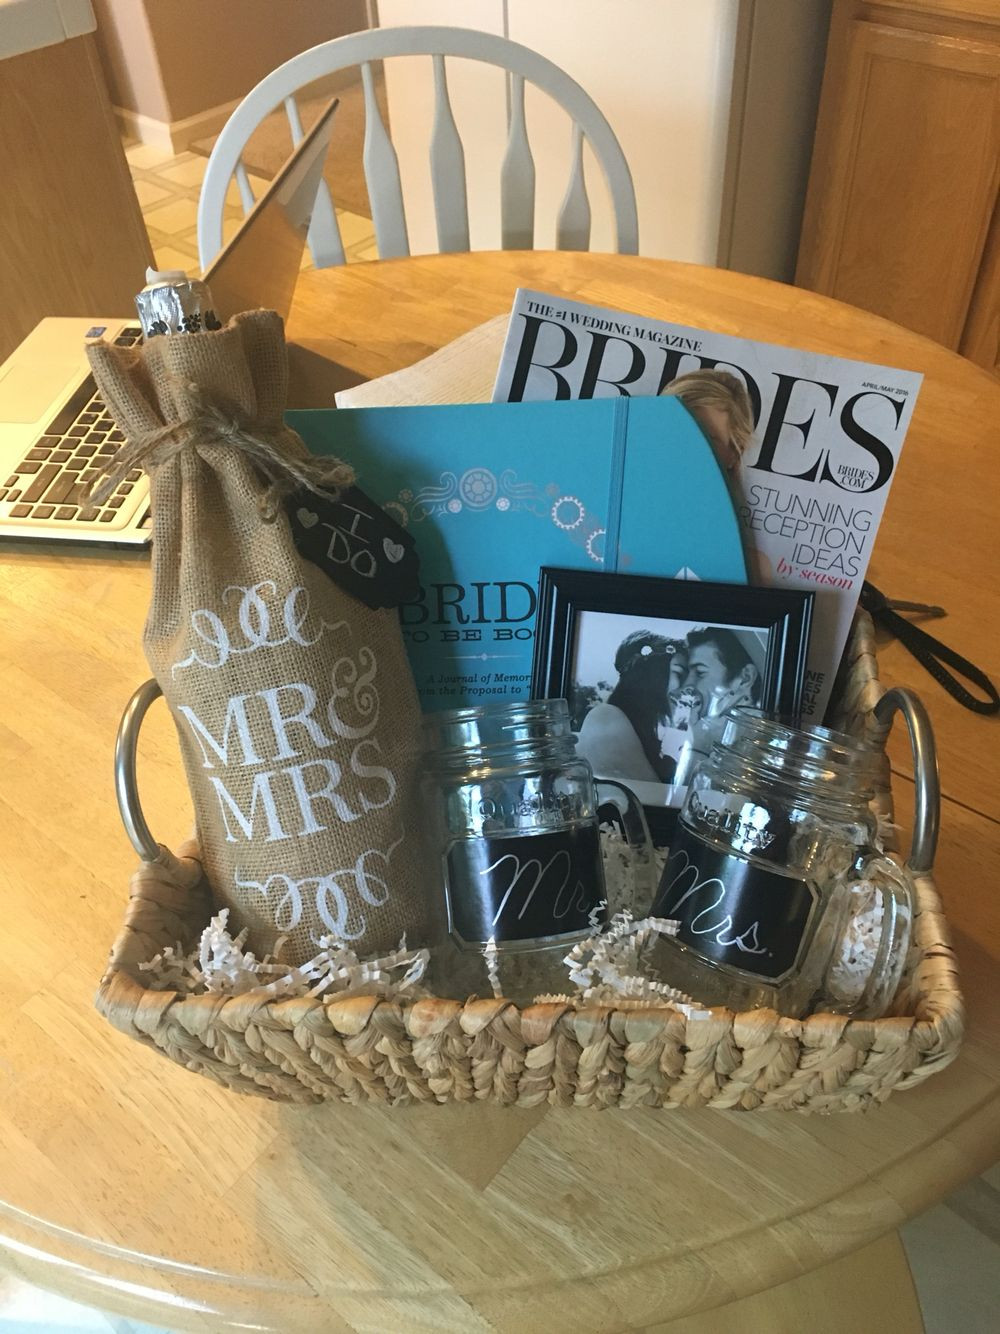 Gift Ideas For Engaged Couples
 Engagement Gift Basket Ideas For Couples